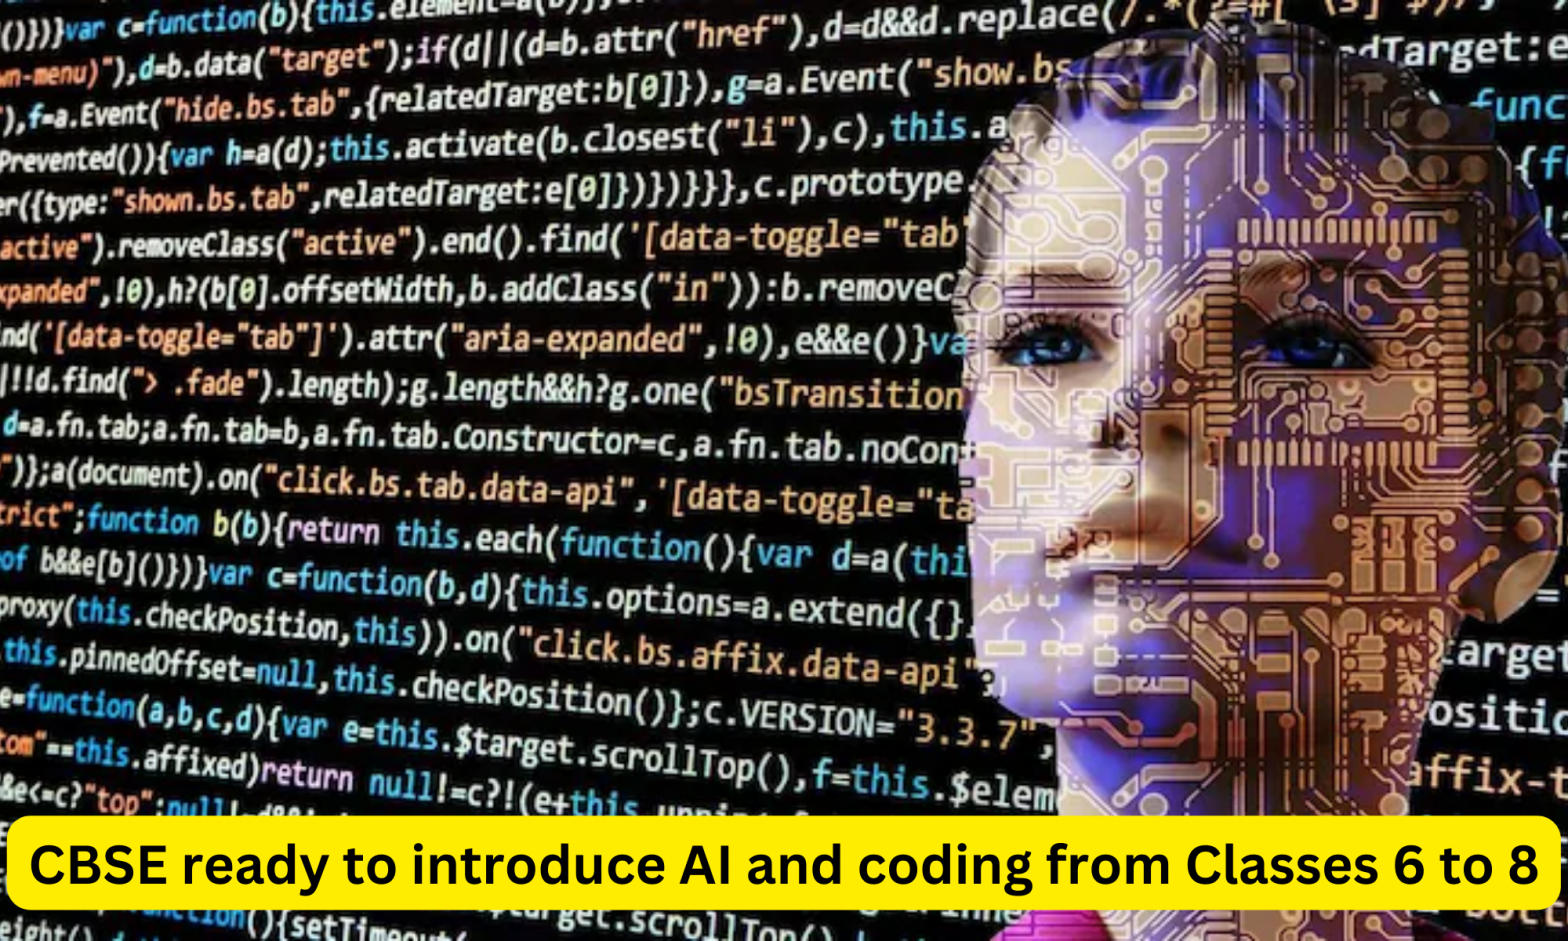 CBSE ready to introduce AI and coding from Classes 6 to 8